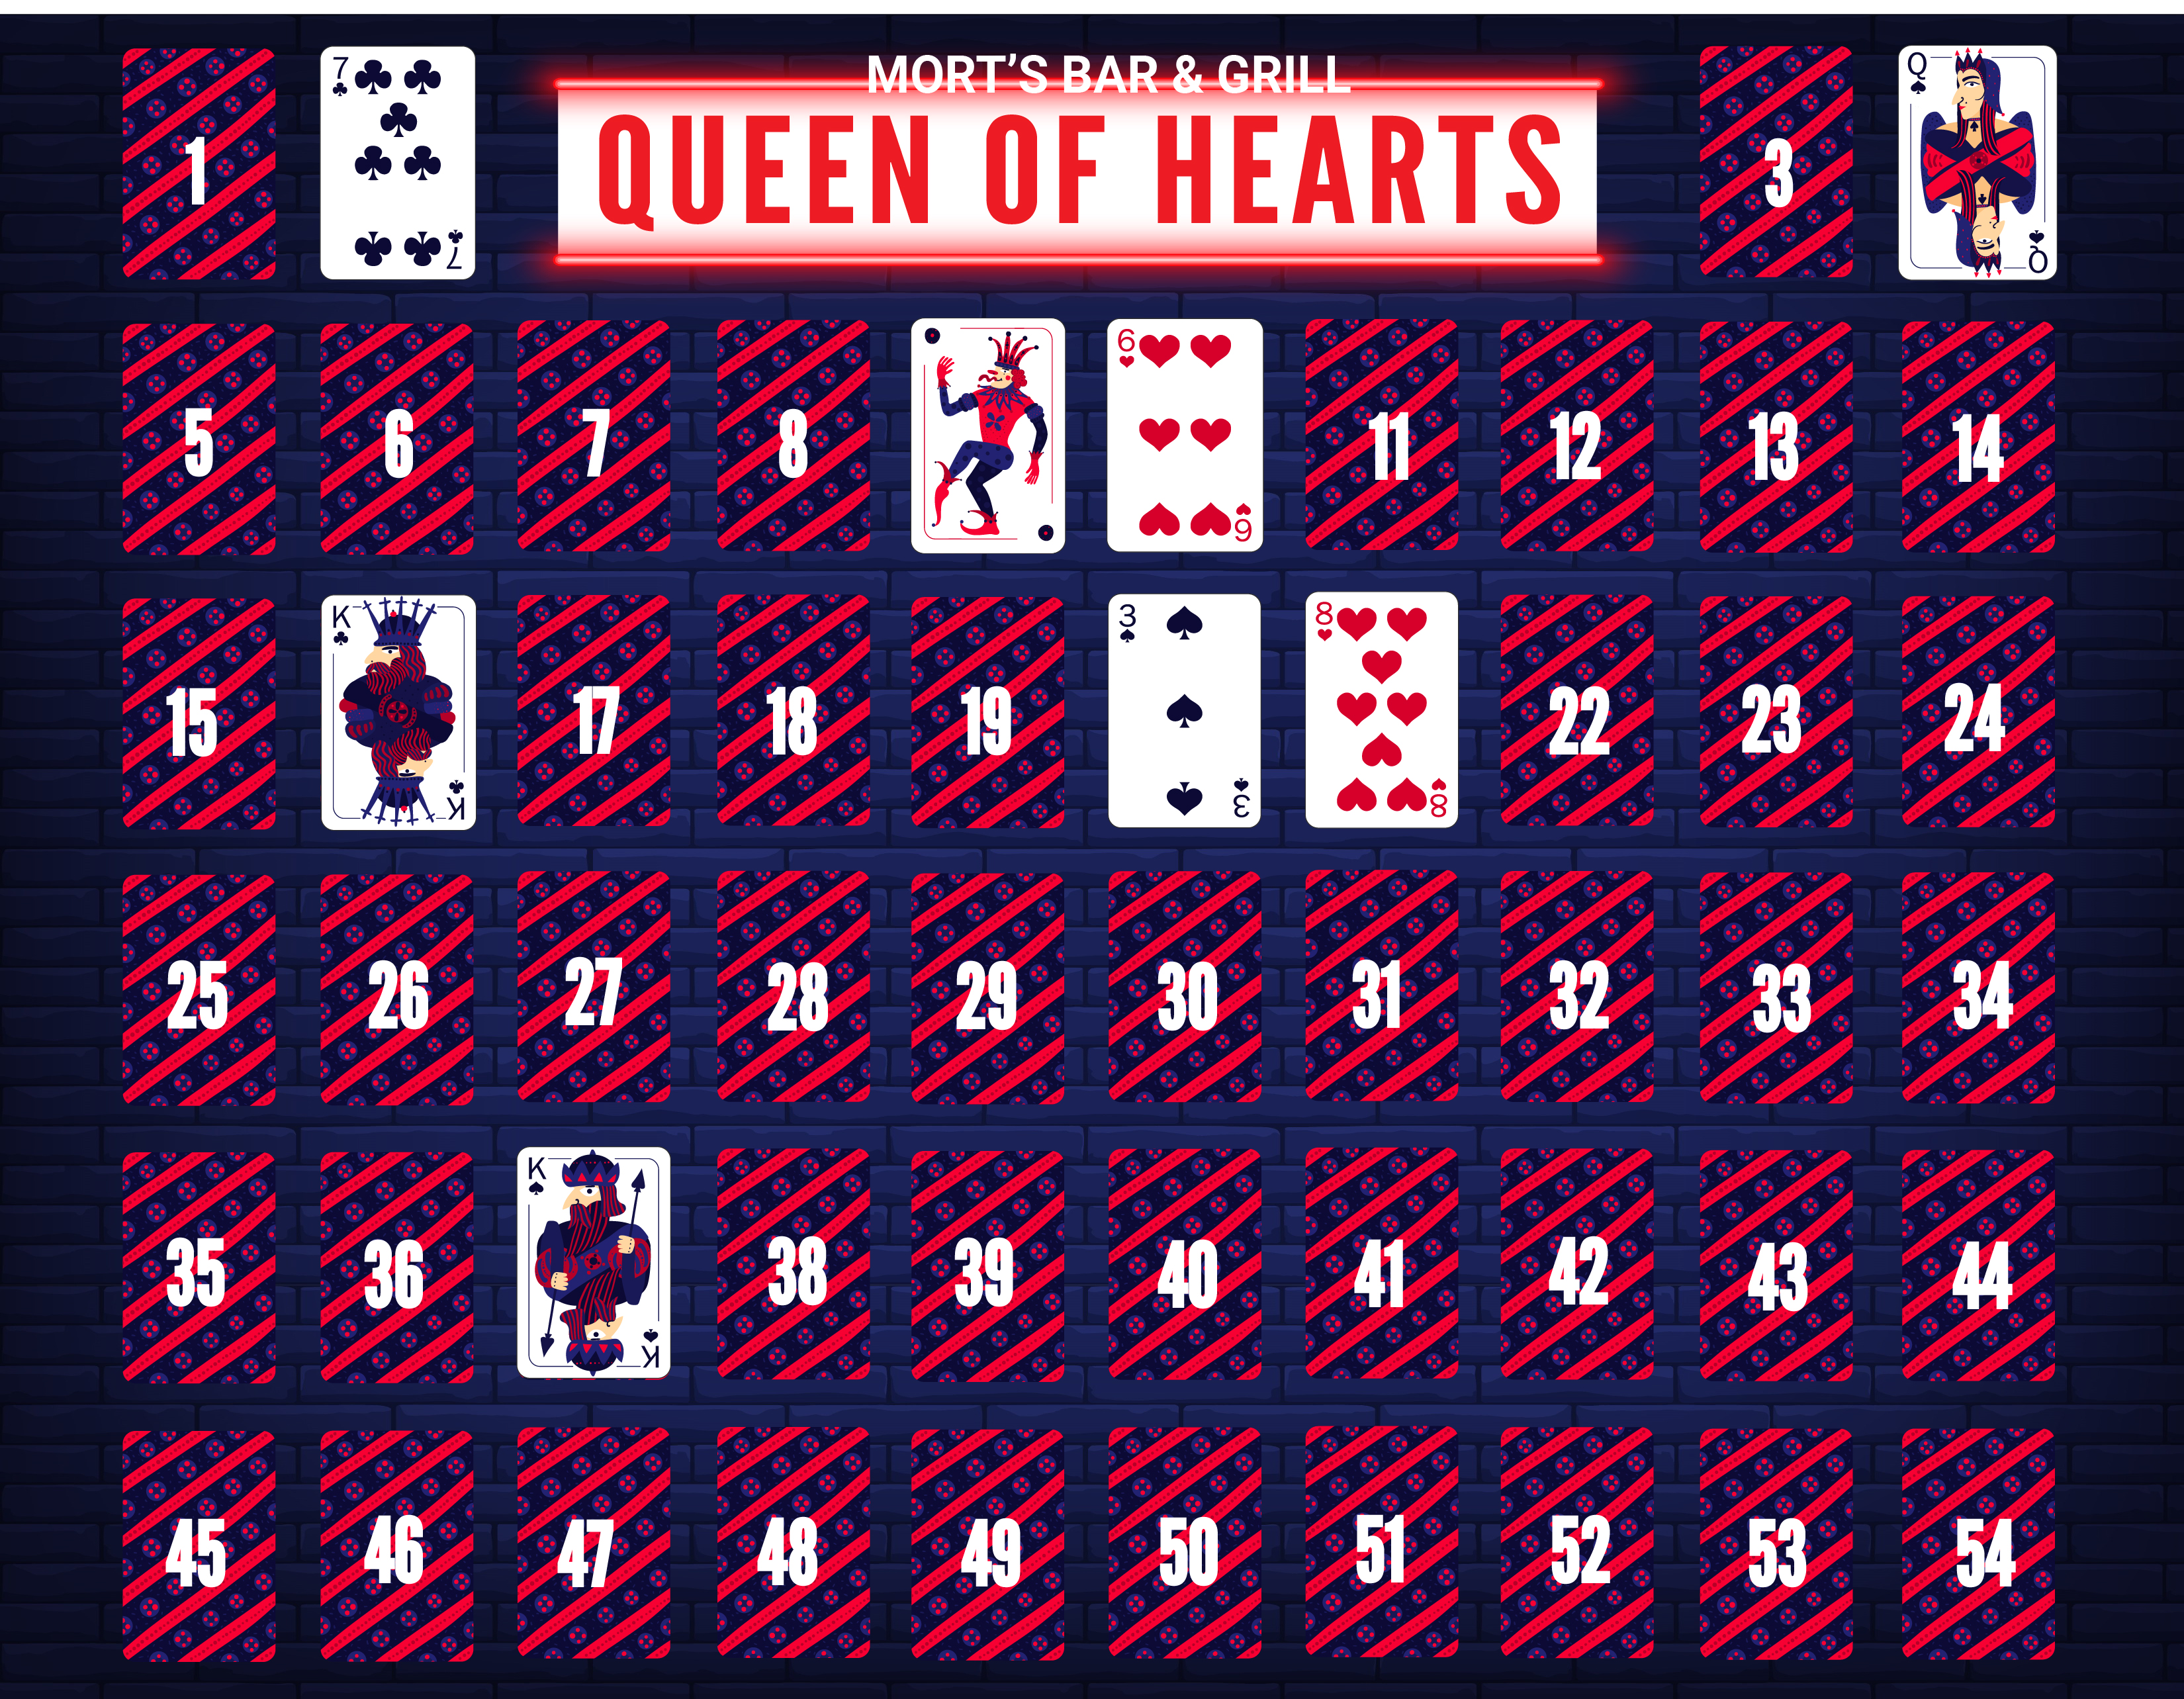 Queen of Hearts Game Board as of June 25, 2022 - Card #20, the 3 of spades